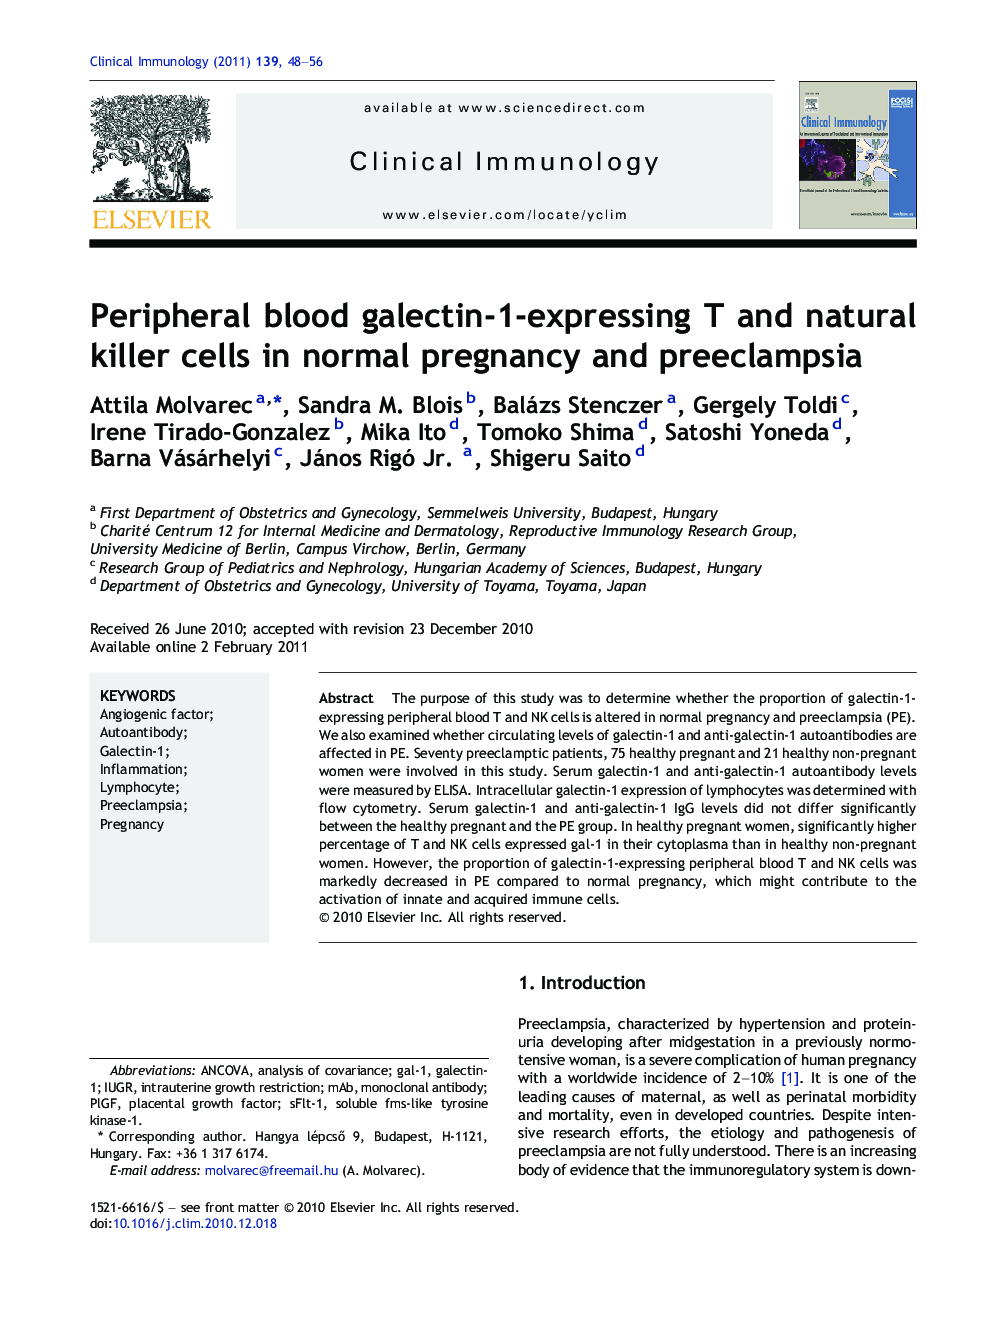 Peripheral blood galectin-1-expressing T and natural killer cells in normal pregnancy and preeclampsia